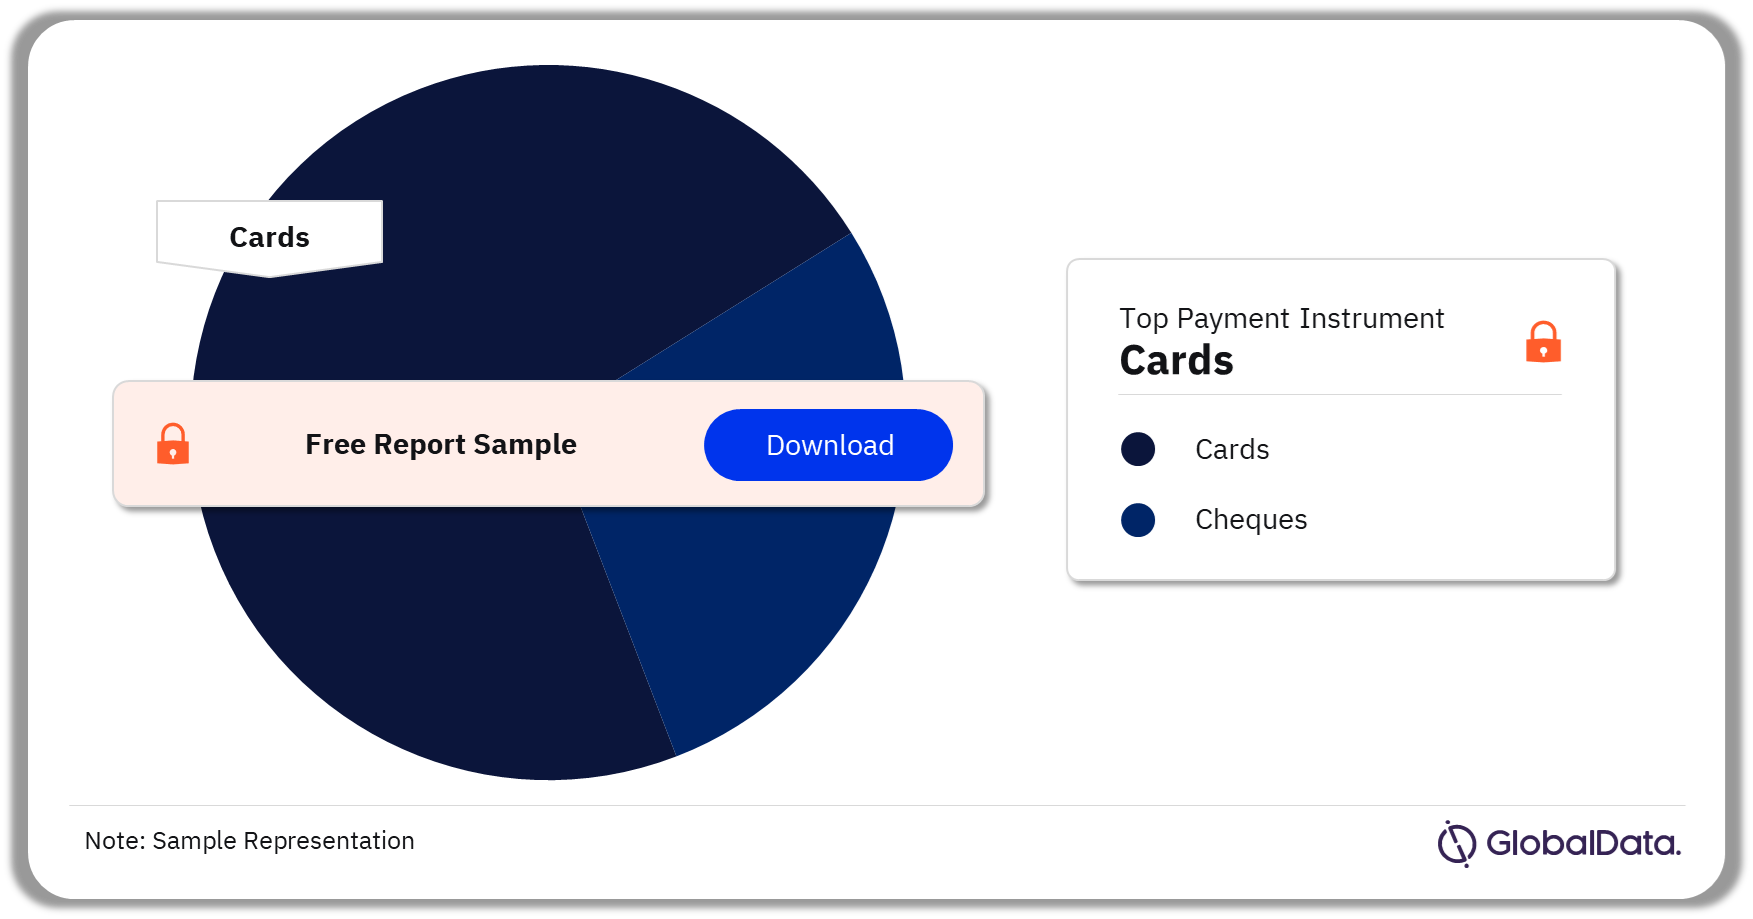 Kuwait Cards and Payments Market Analysis by Payment Instruments, 2023 (%)